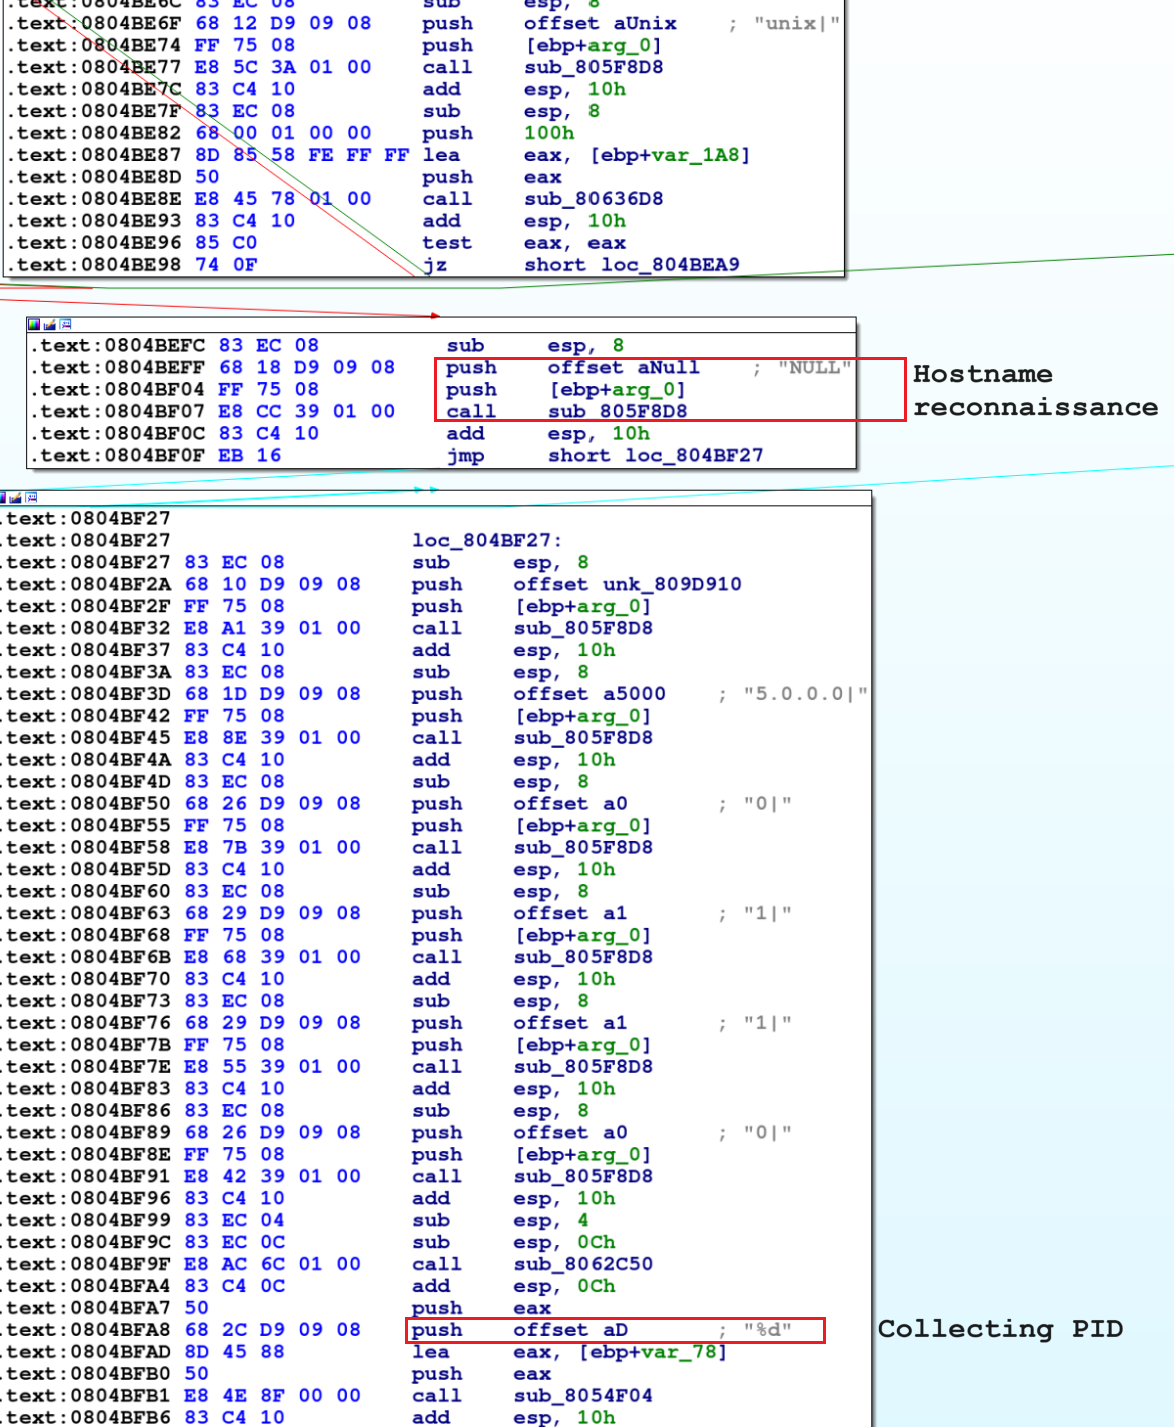 Image 5 is a screenshot of the Bifrost code that collects the victim data. Highlighted in a red box is the hostname and reconnaissance. In a second red box at the bottom of the screenshot is the code that collects the PID.